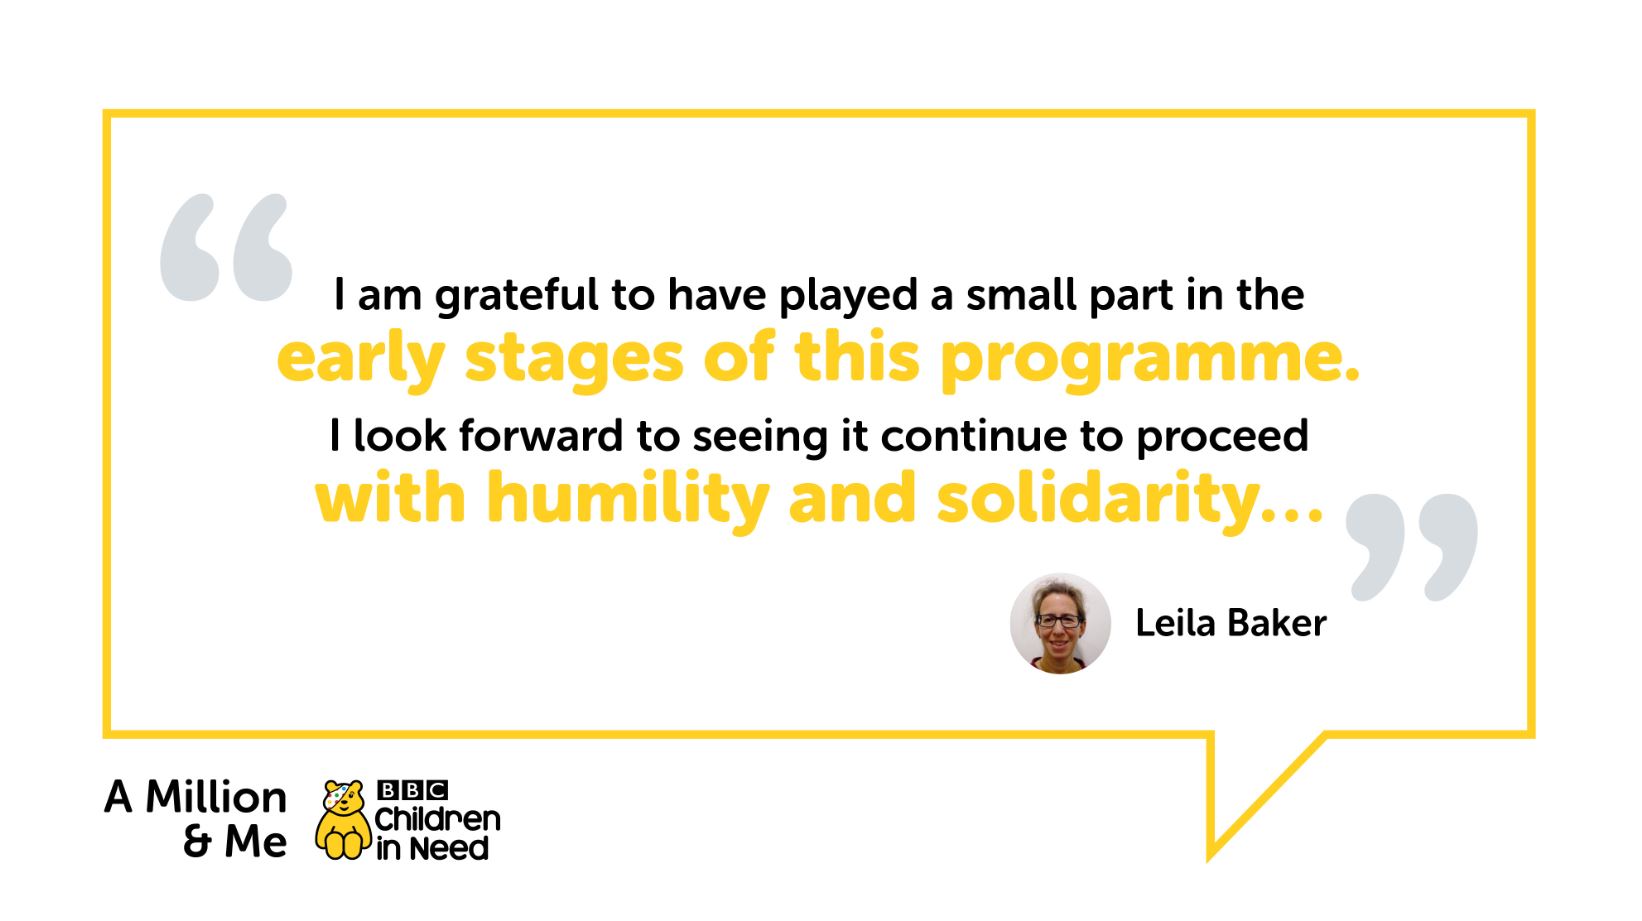 “I am grateful to have played a small part in the early stages of this programme. I look forward to seeing it continue to proceed with humility and solidarity…”